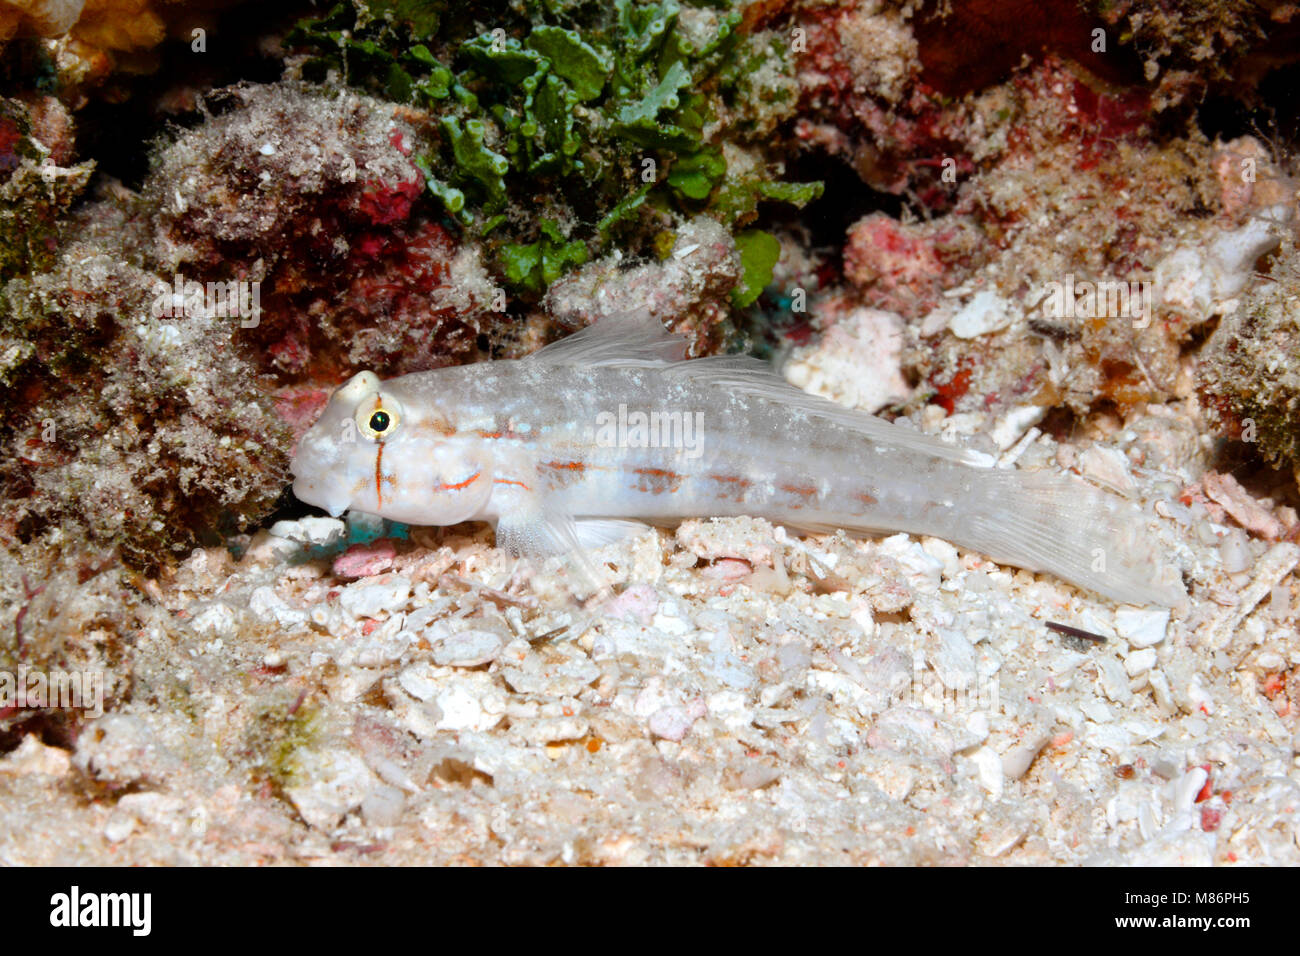 Eyebar Goby, Gnatholepis anjerensis. Also known as a Shoulderspot Goby. Stock Photo